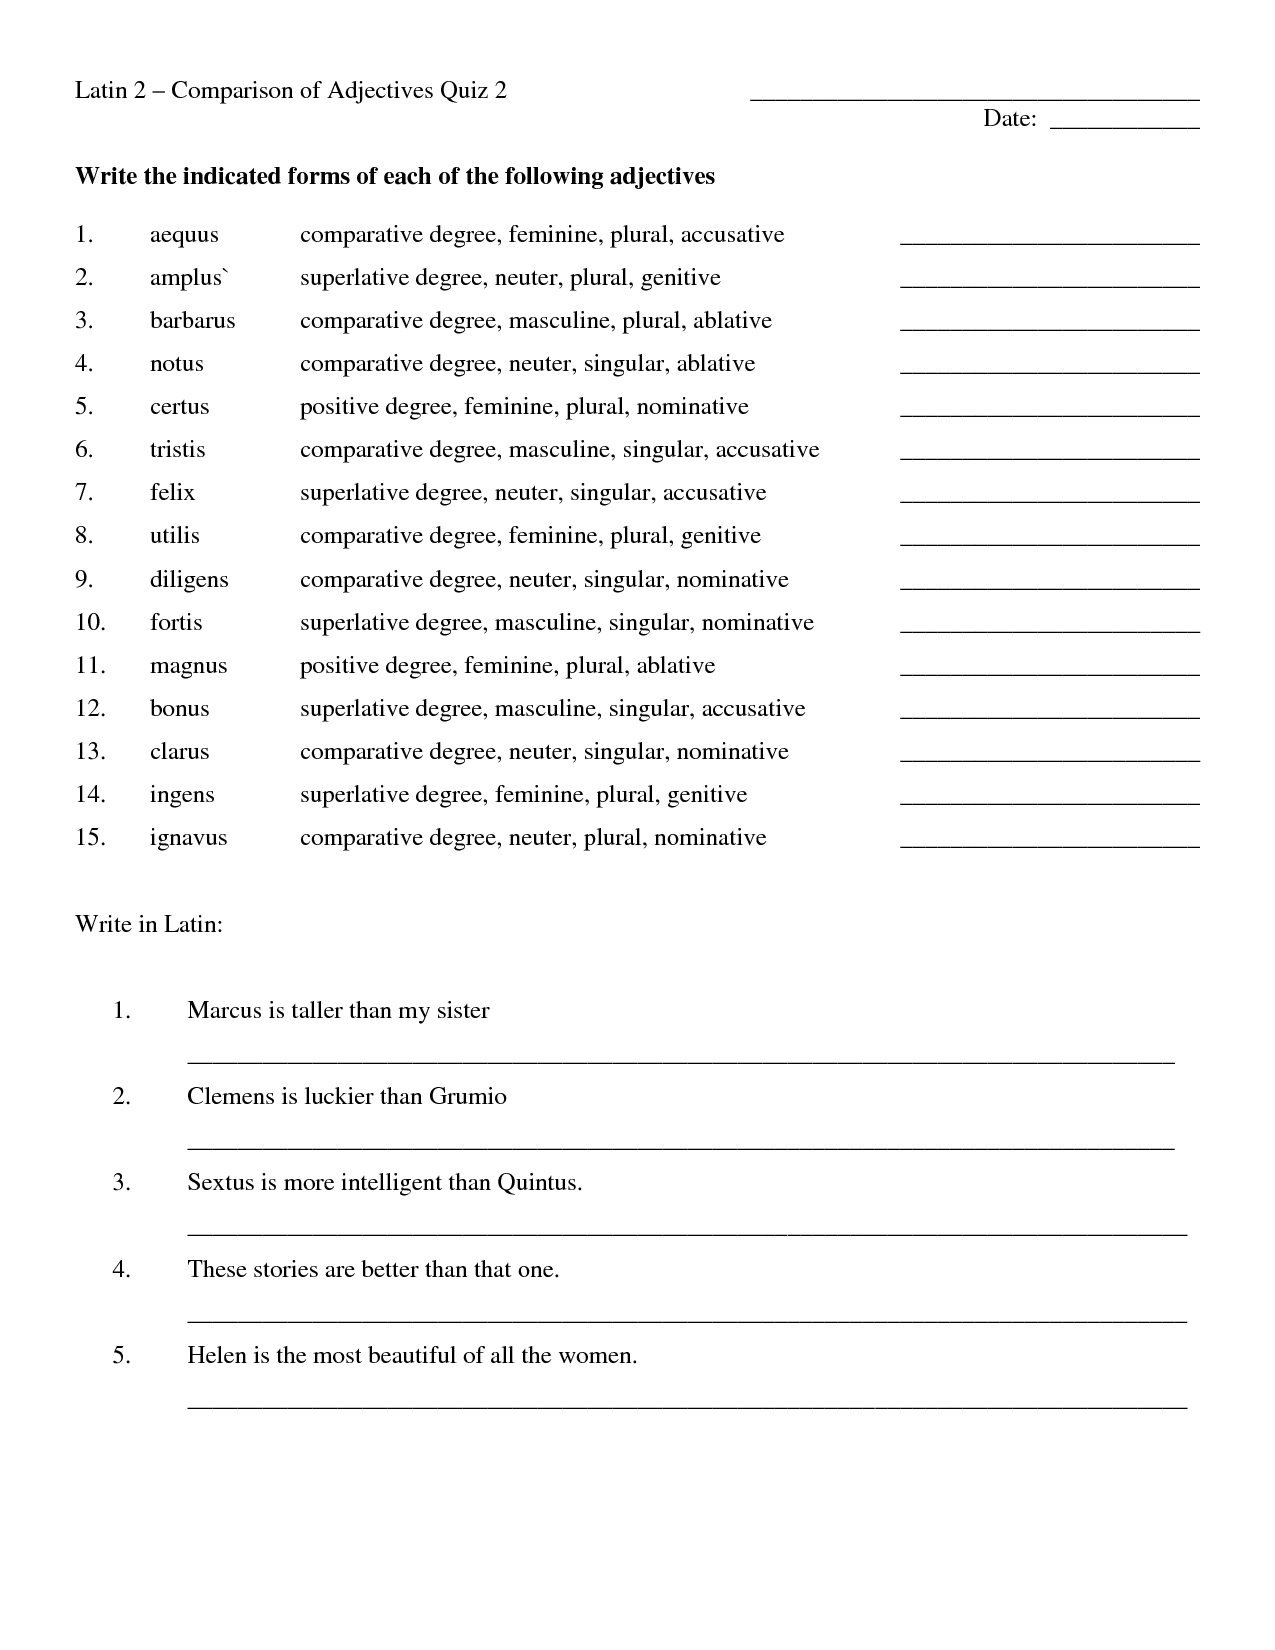 11-best-images-of-adjectives-degrees-of-worksheets-comparison-adjectives-worksheets-adjective